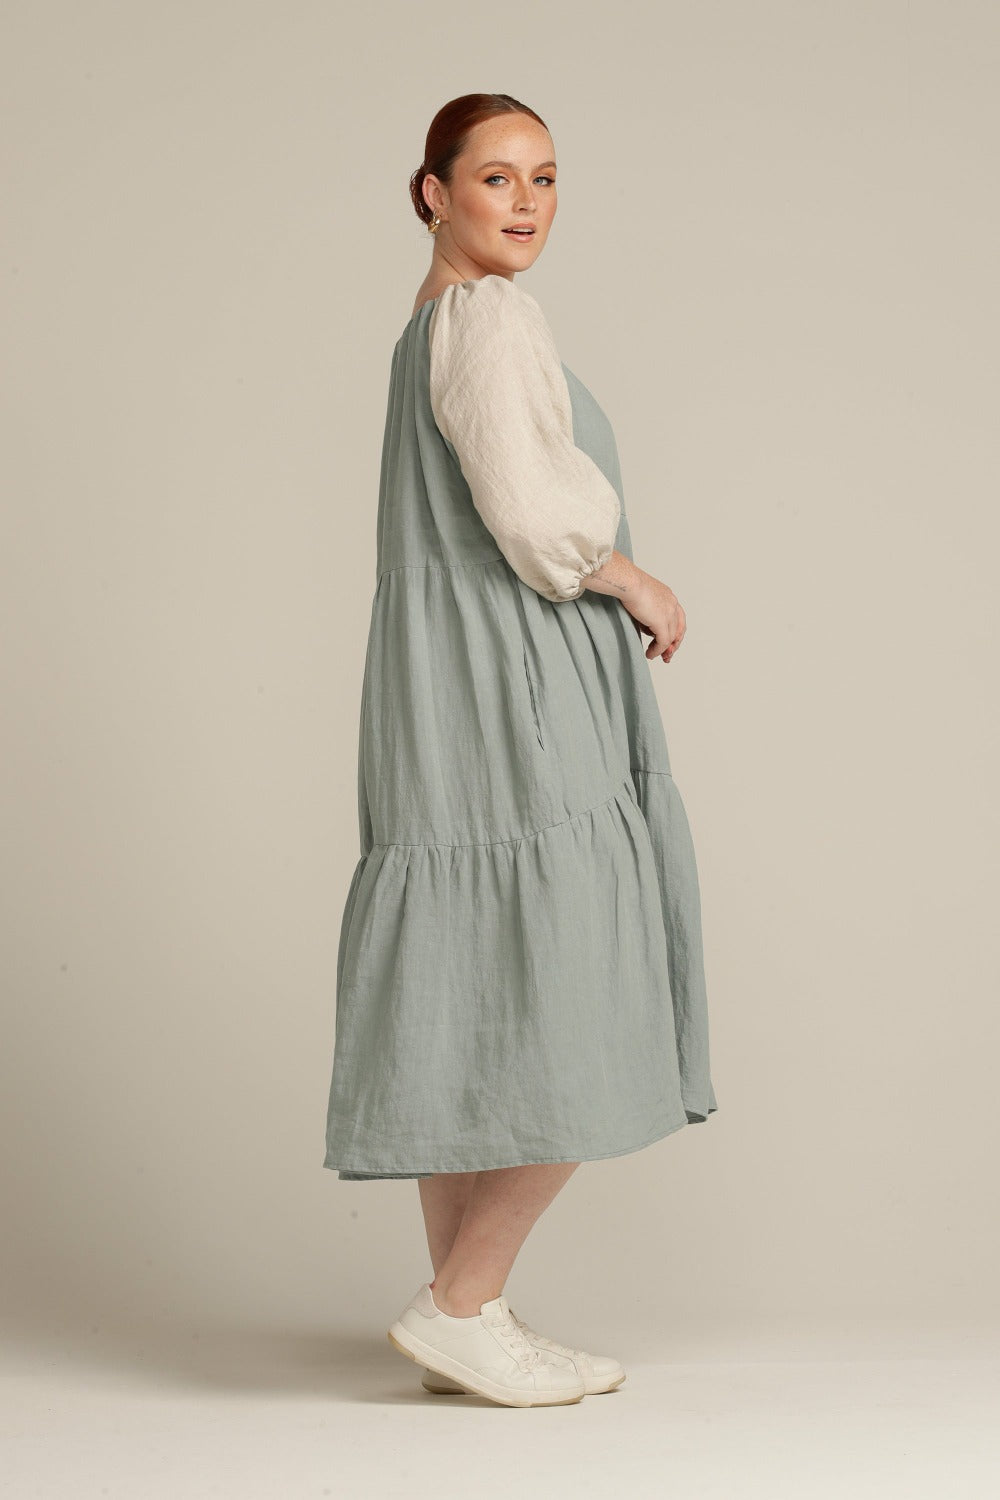 side view of sage linen dress, woman is looking at camera